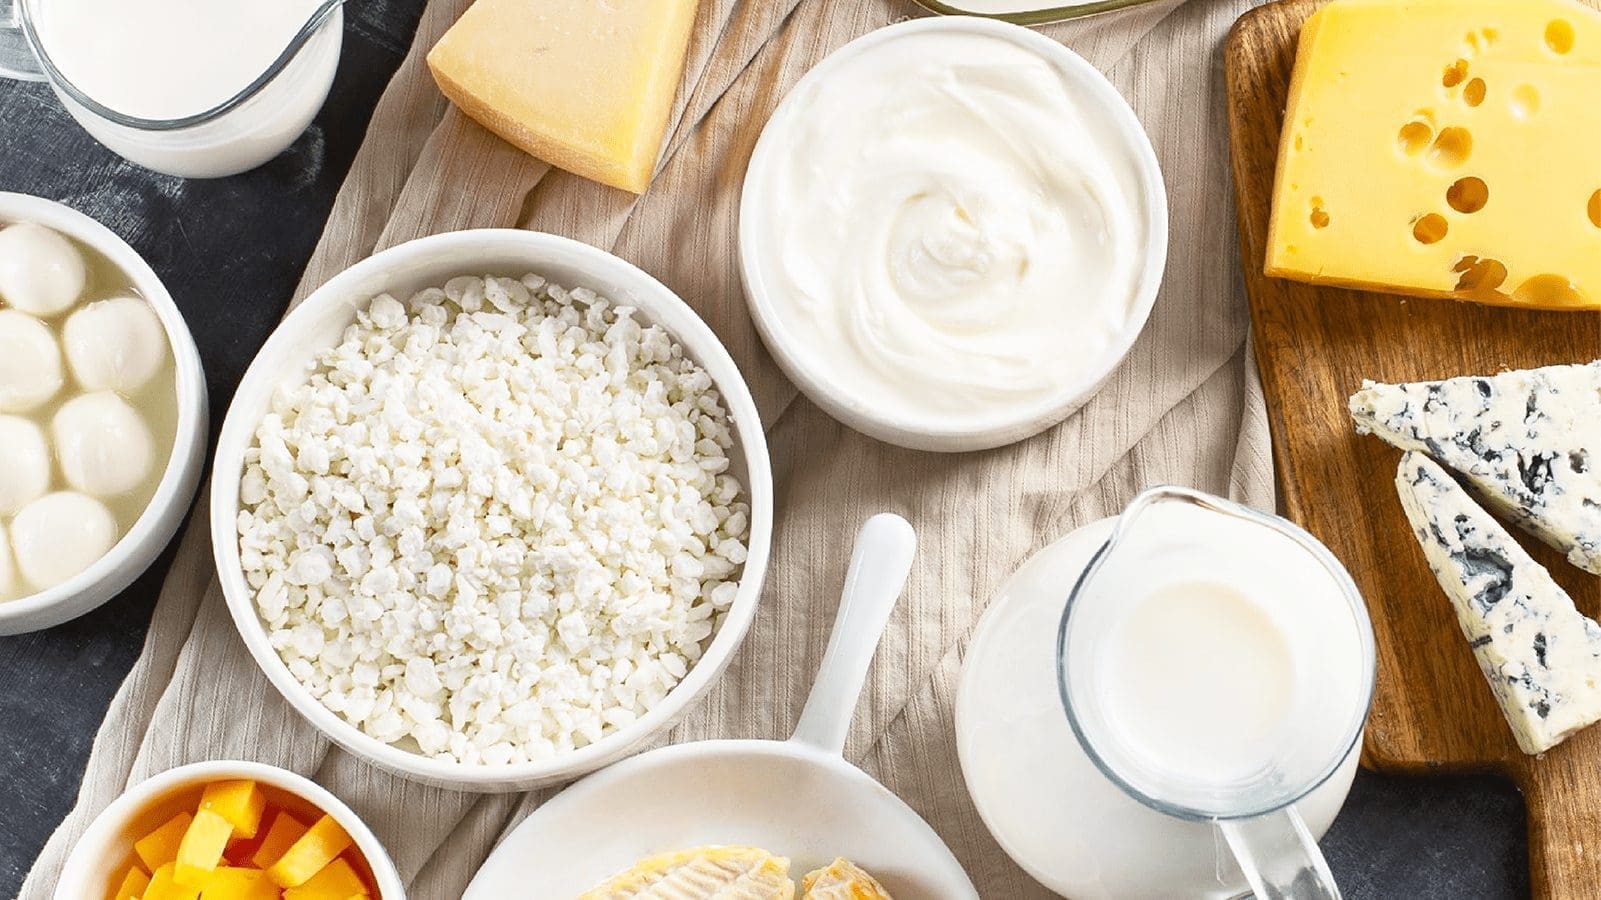 High protein adds a kick to dairy products